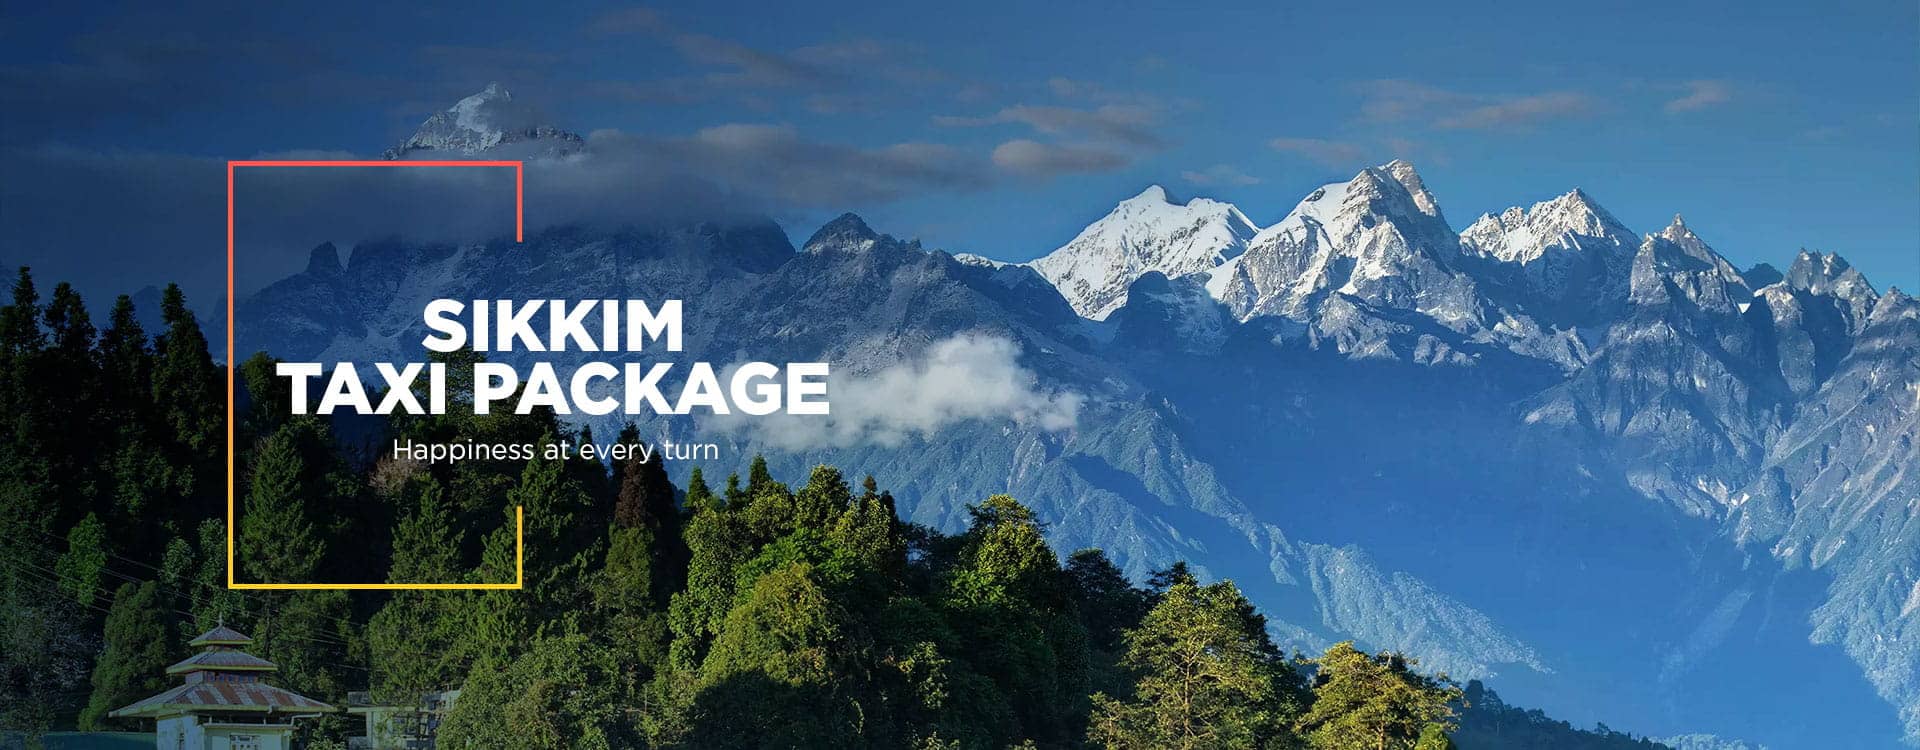 Sikkim Taxi Package